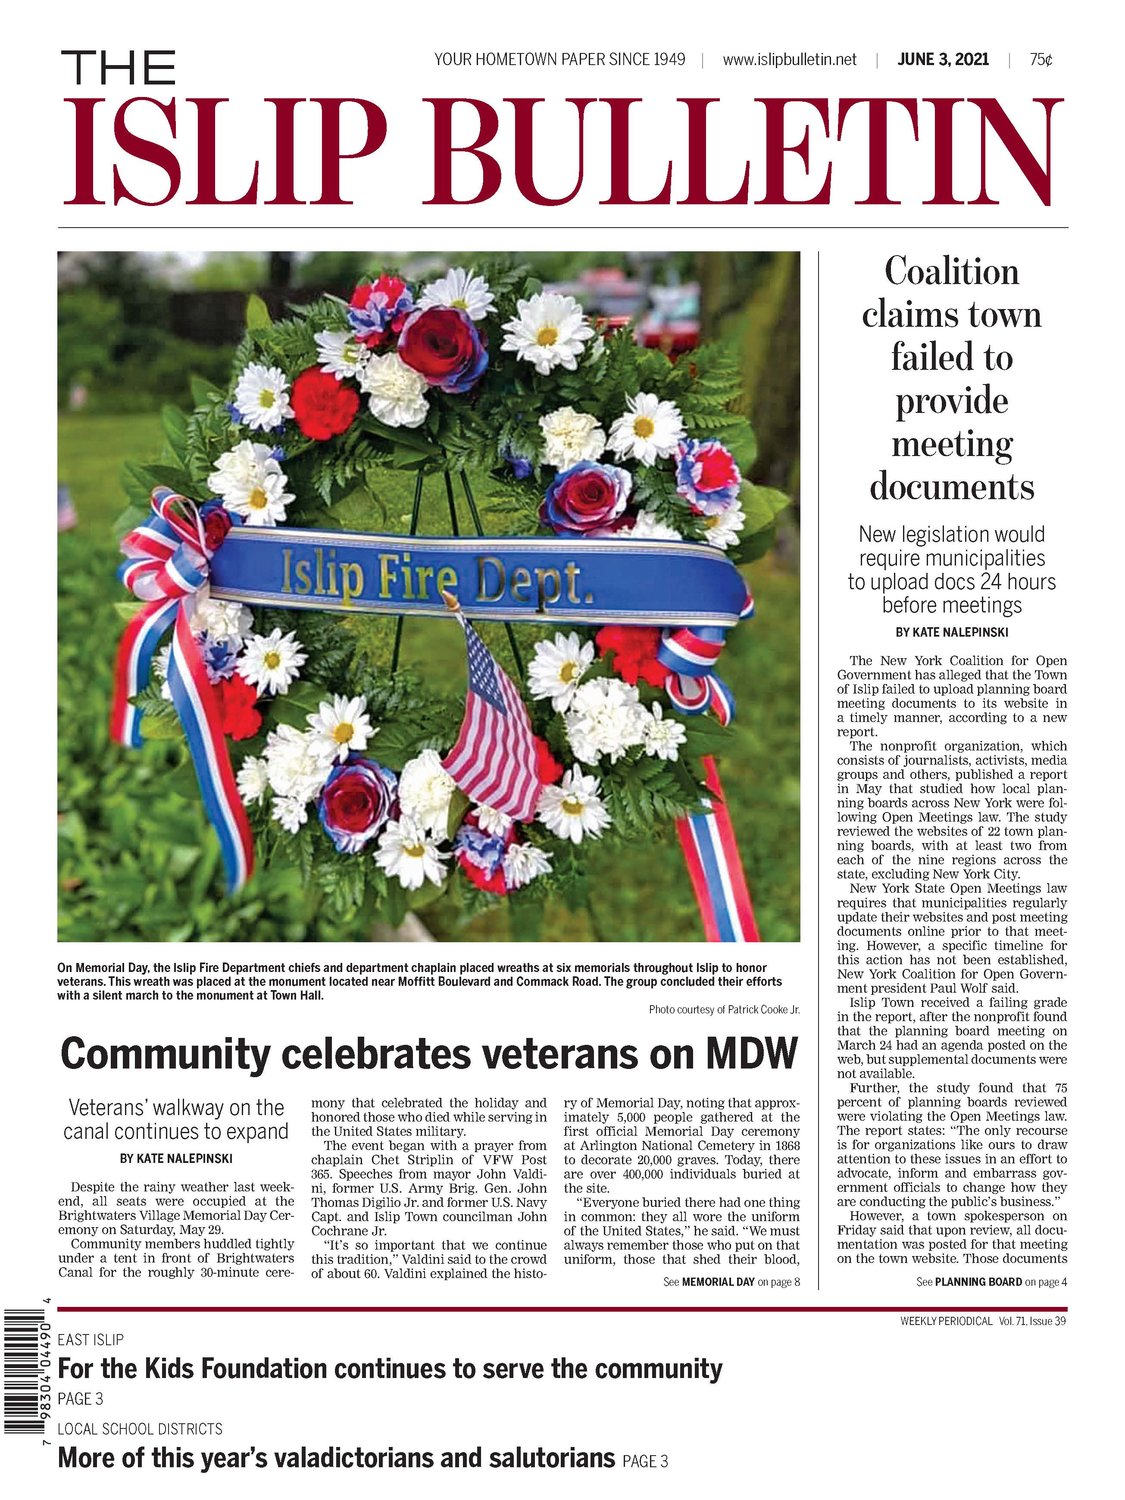 June
This month, the town looked reduced building setbacks for Tritec, EI baseball started the season with a shutout, and the community celebrated veterans on Memorial Day. Rock City Dogs opened and we reviewed it, and EI Board of Education results had a tabulation error.